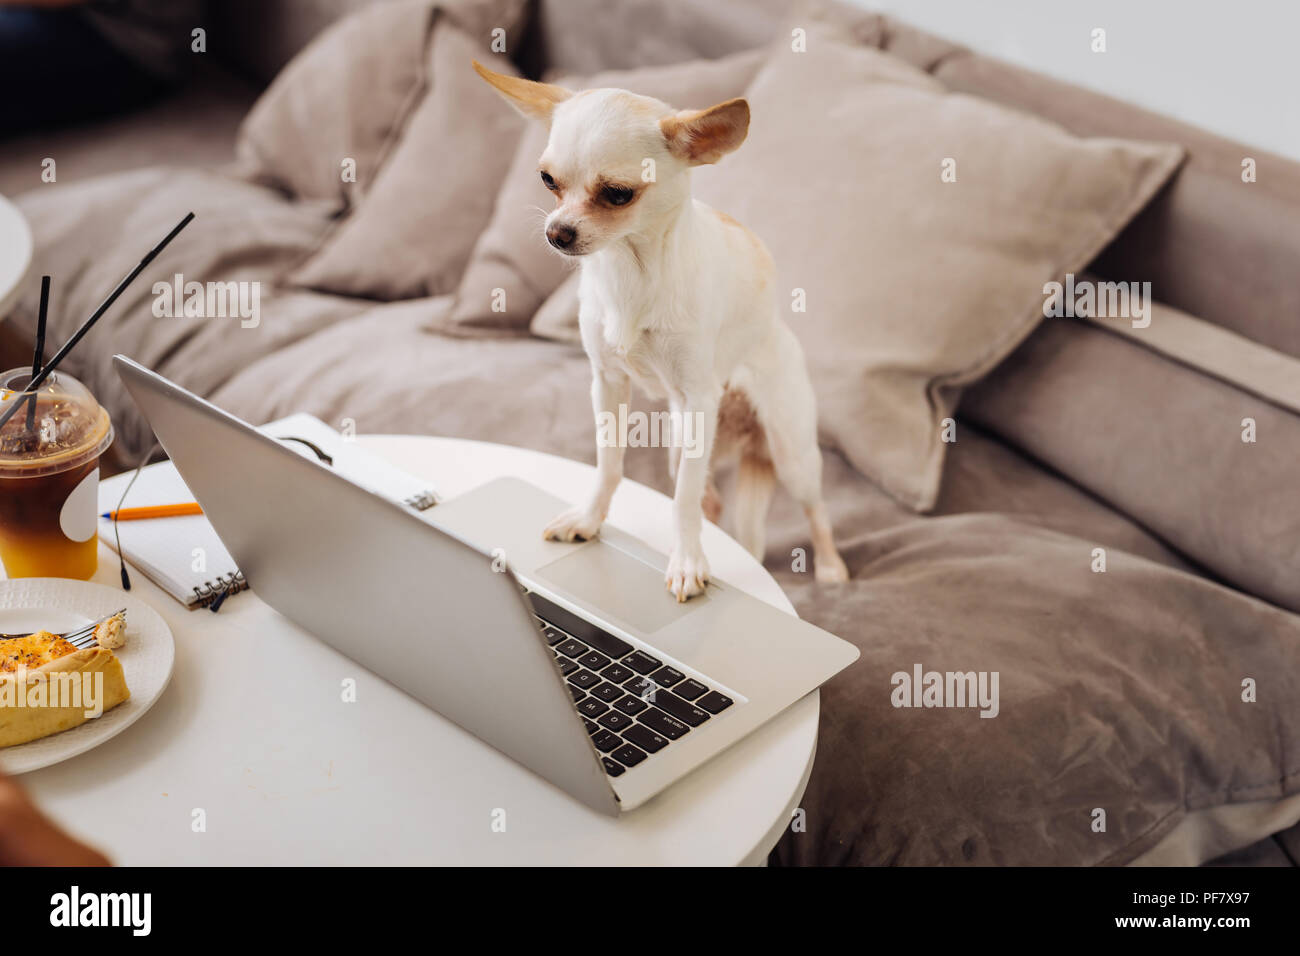 Little white dog touching laptop standing on the table Stock Photo